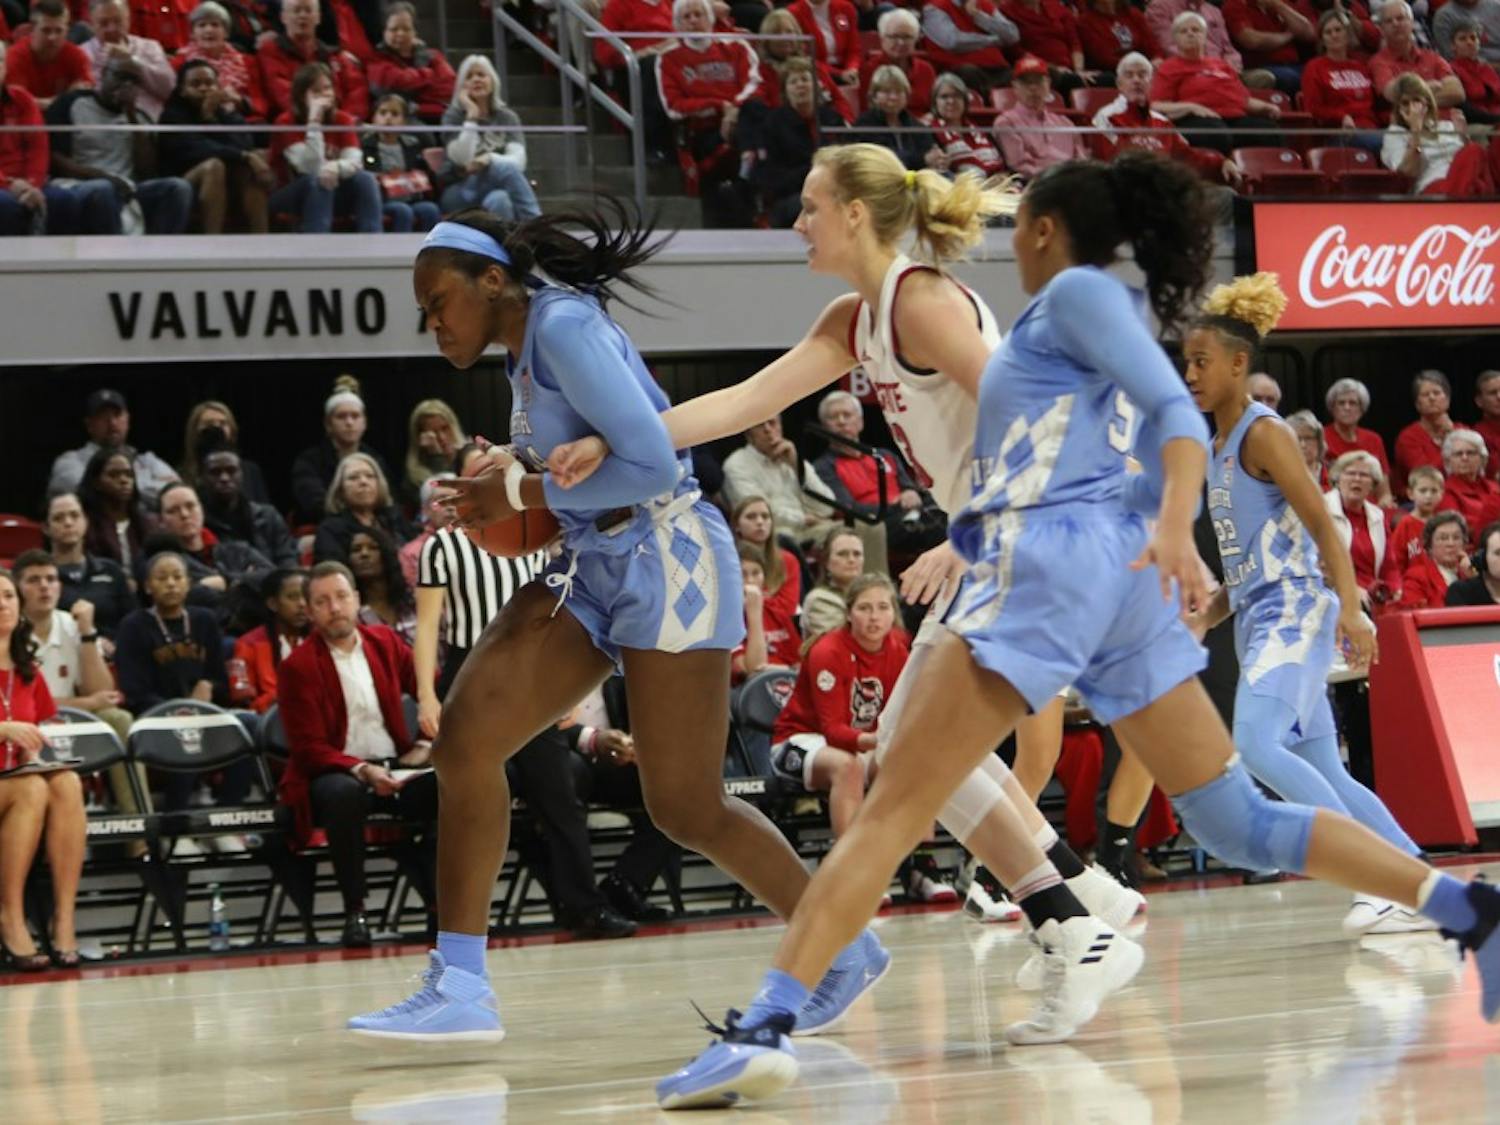 UNC's won 64-51 against NC State at Reynolds Coliseum on Sunday, Feb. 3, 2019 in Raleigh, NC. The Tar Heels Women's Basketball Team (14-9) handed the Wolfpack (21-1) their first loss of the season.